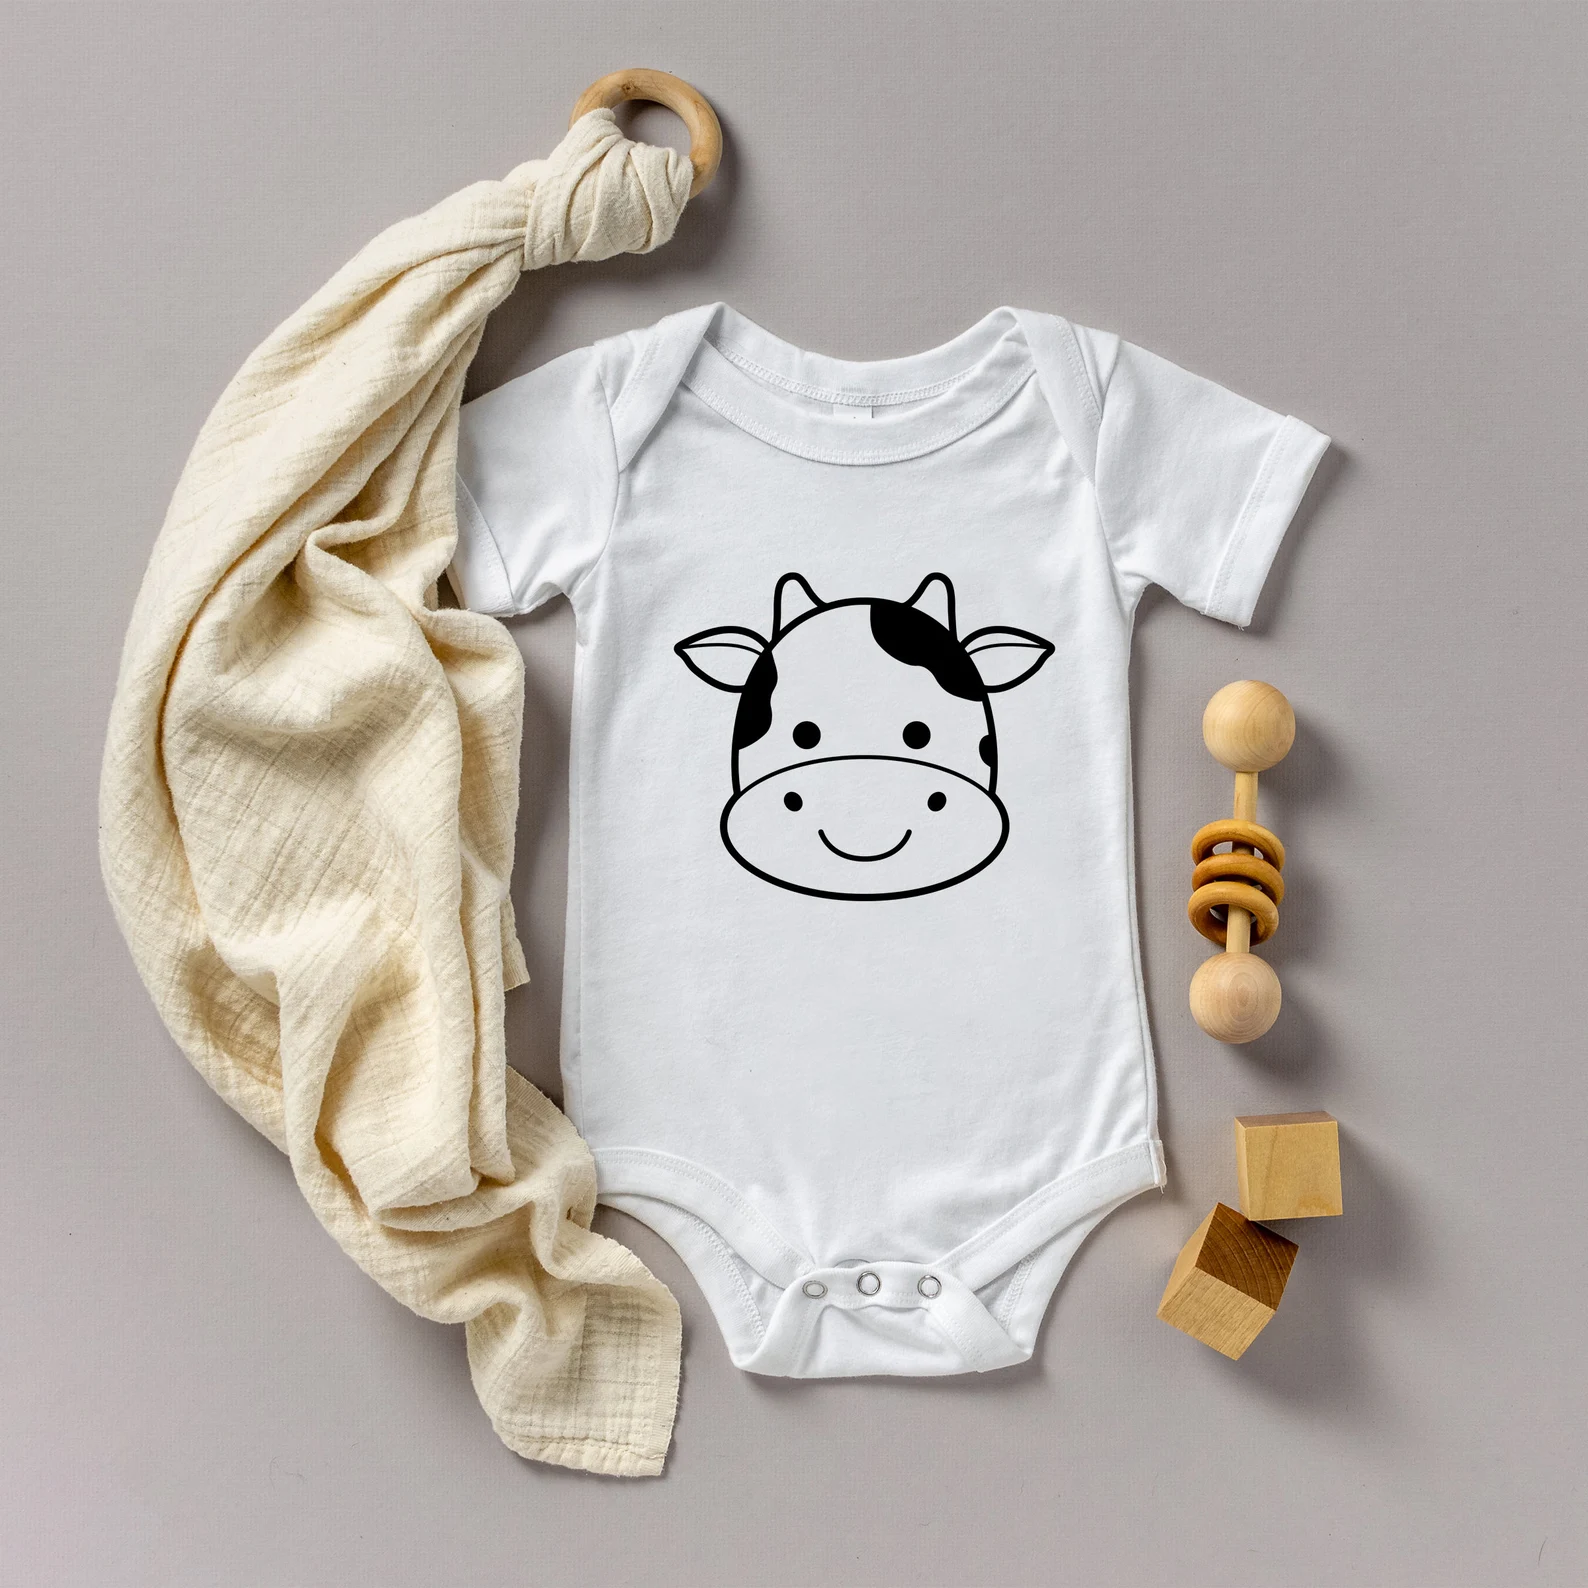 Baby bodysuit with a cow face on it.